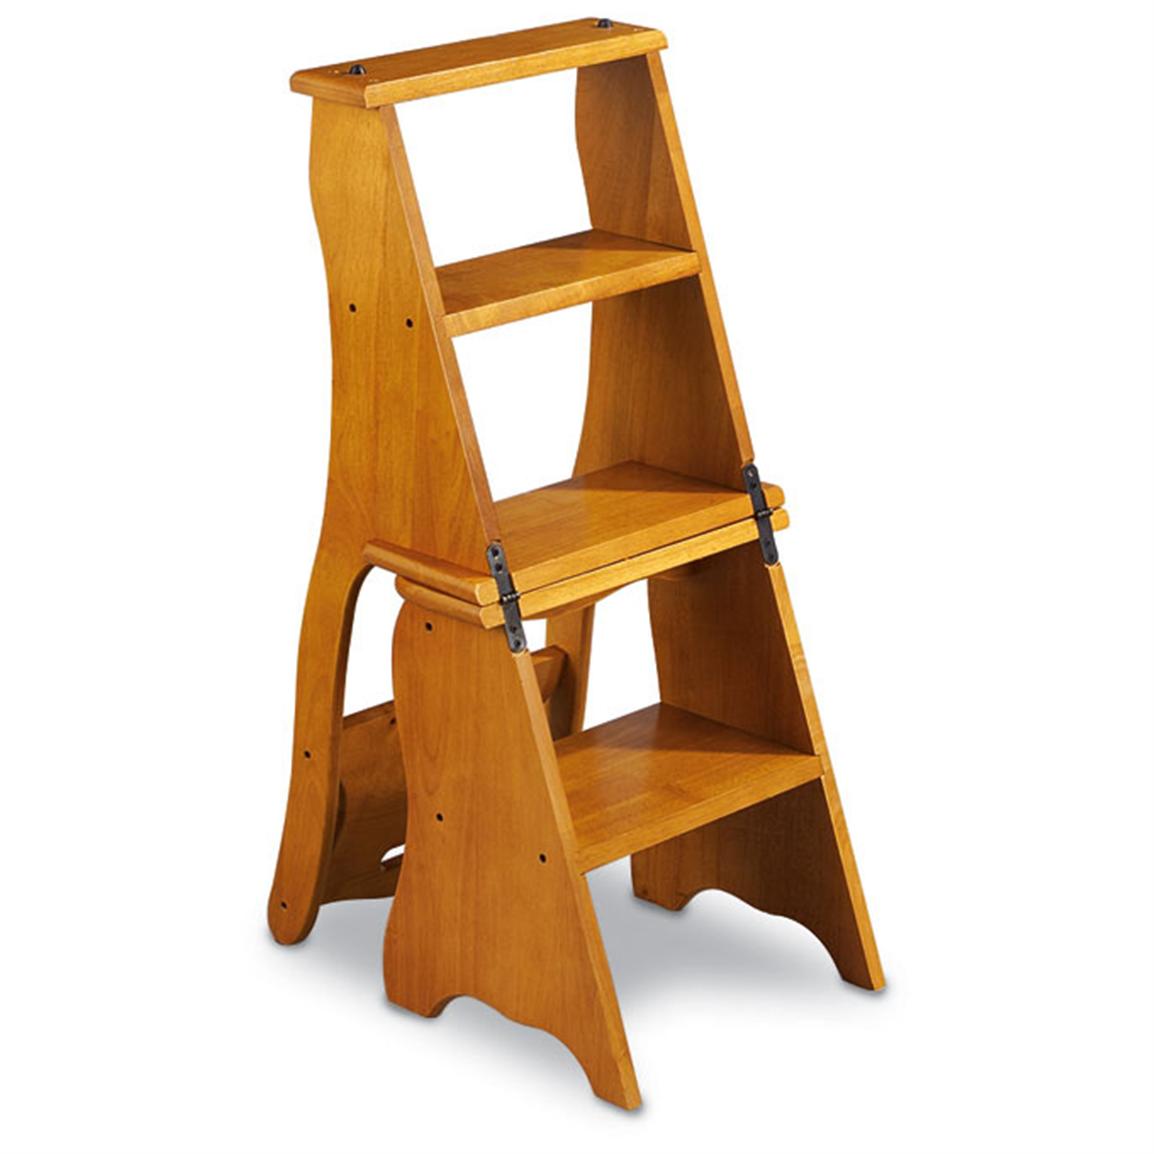 Wooden Chair / Step Stool - 72778, at Sportsman's Guide